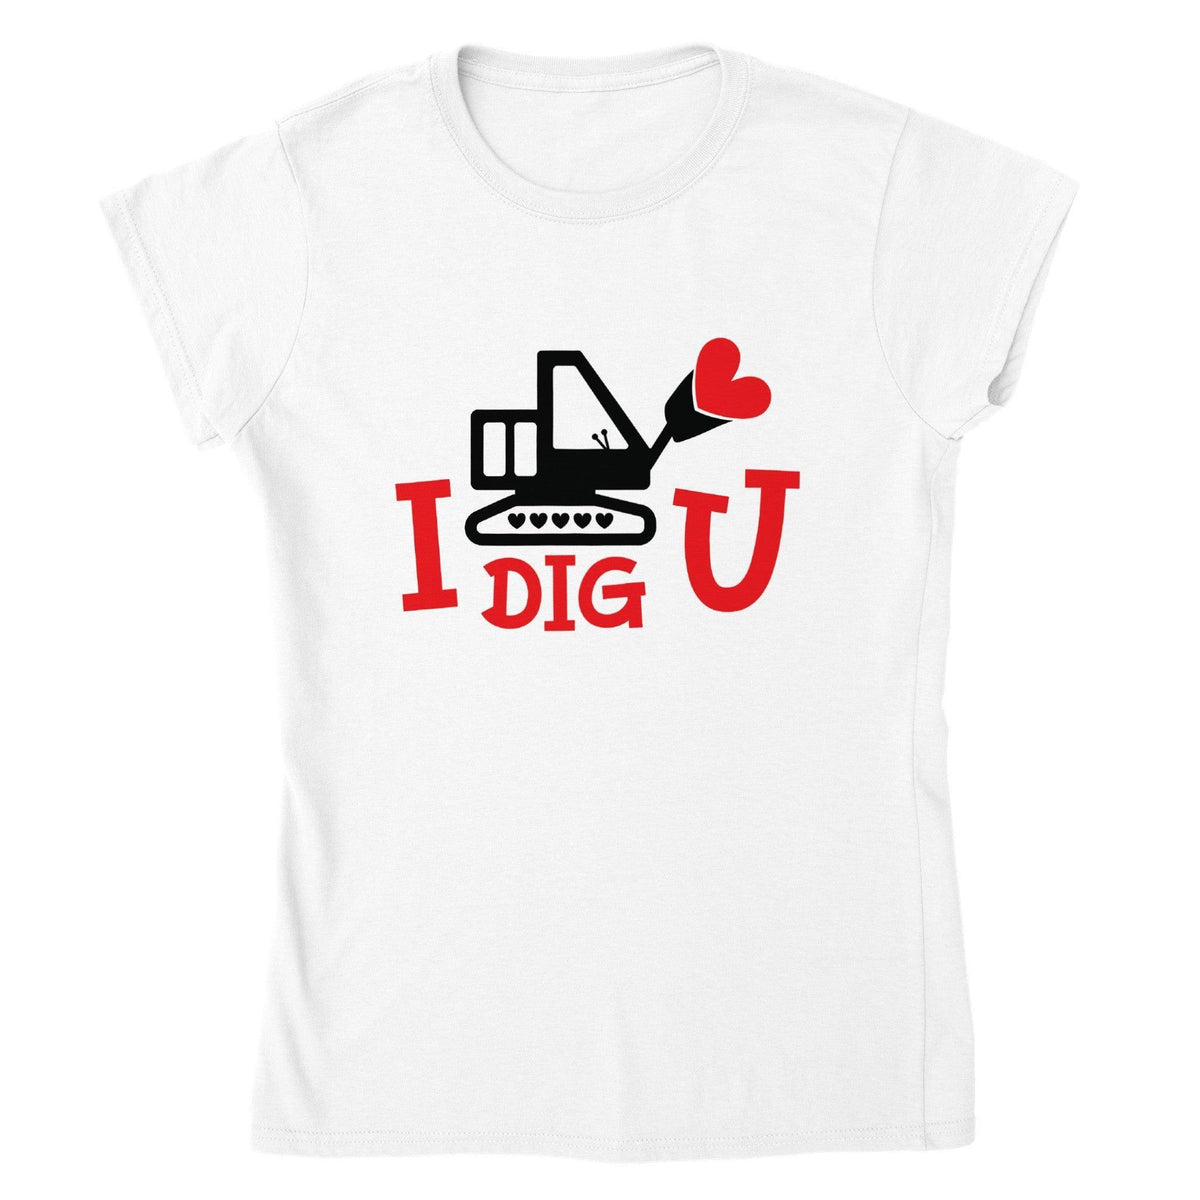 I DIG YOU T-shirt-Regular Fit Tee-StylinArts